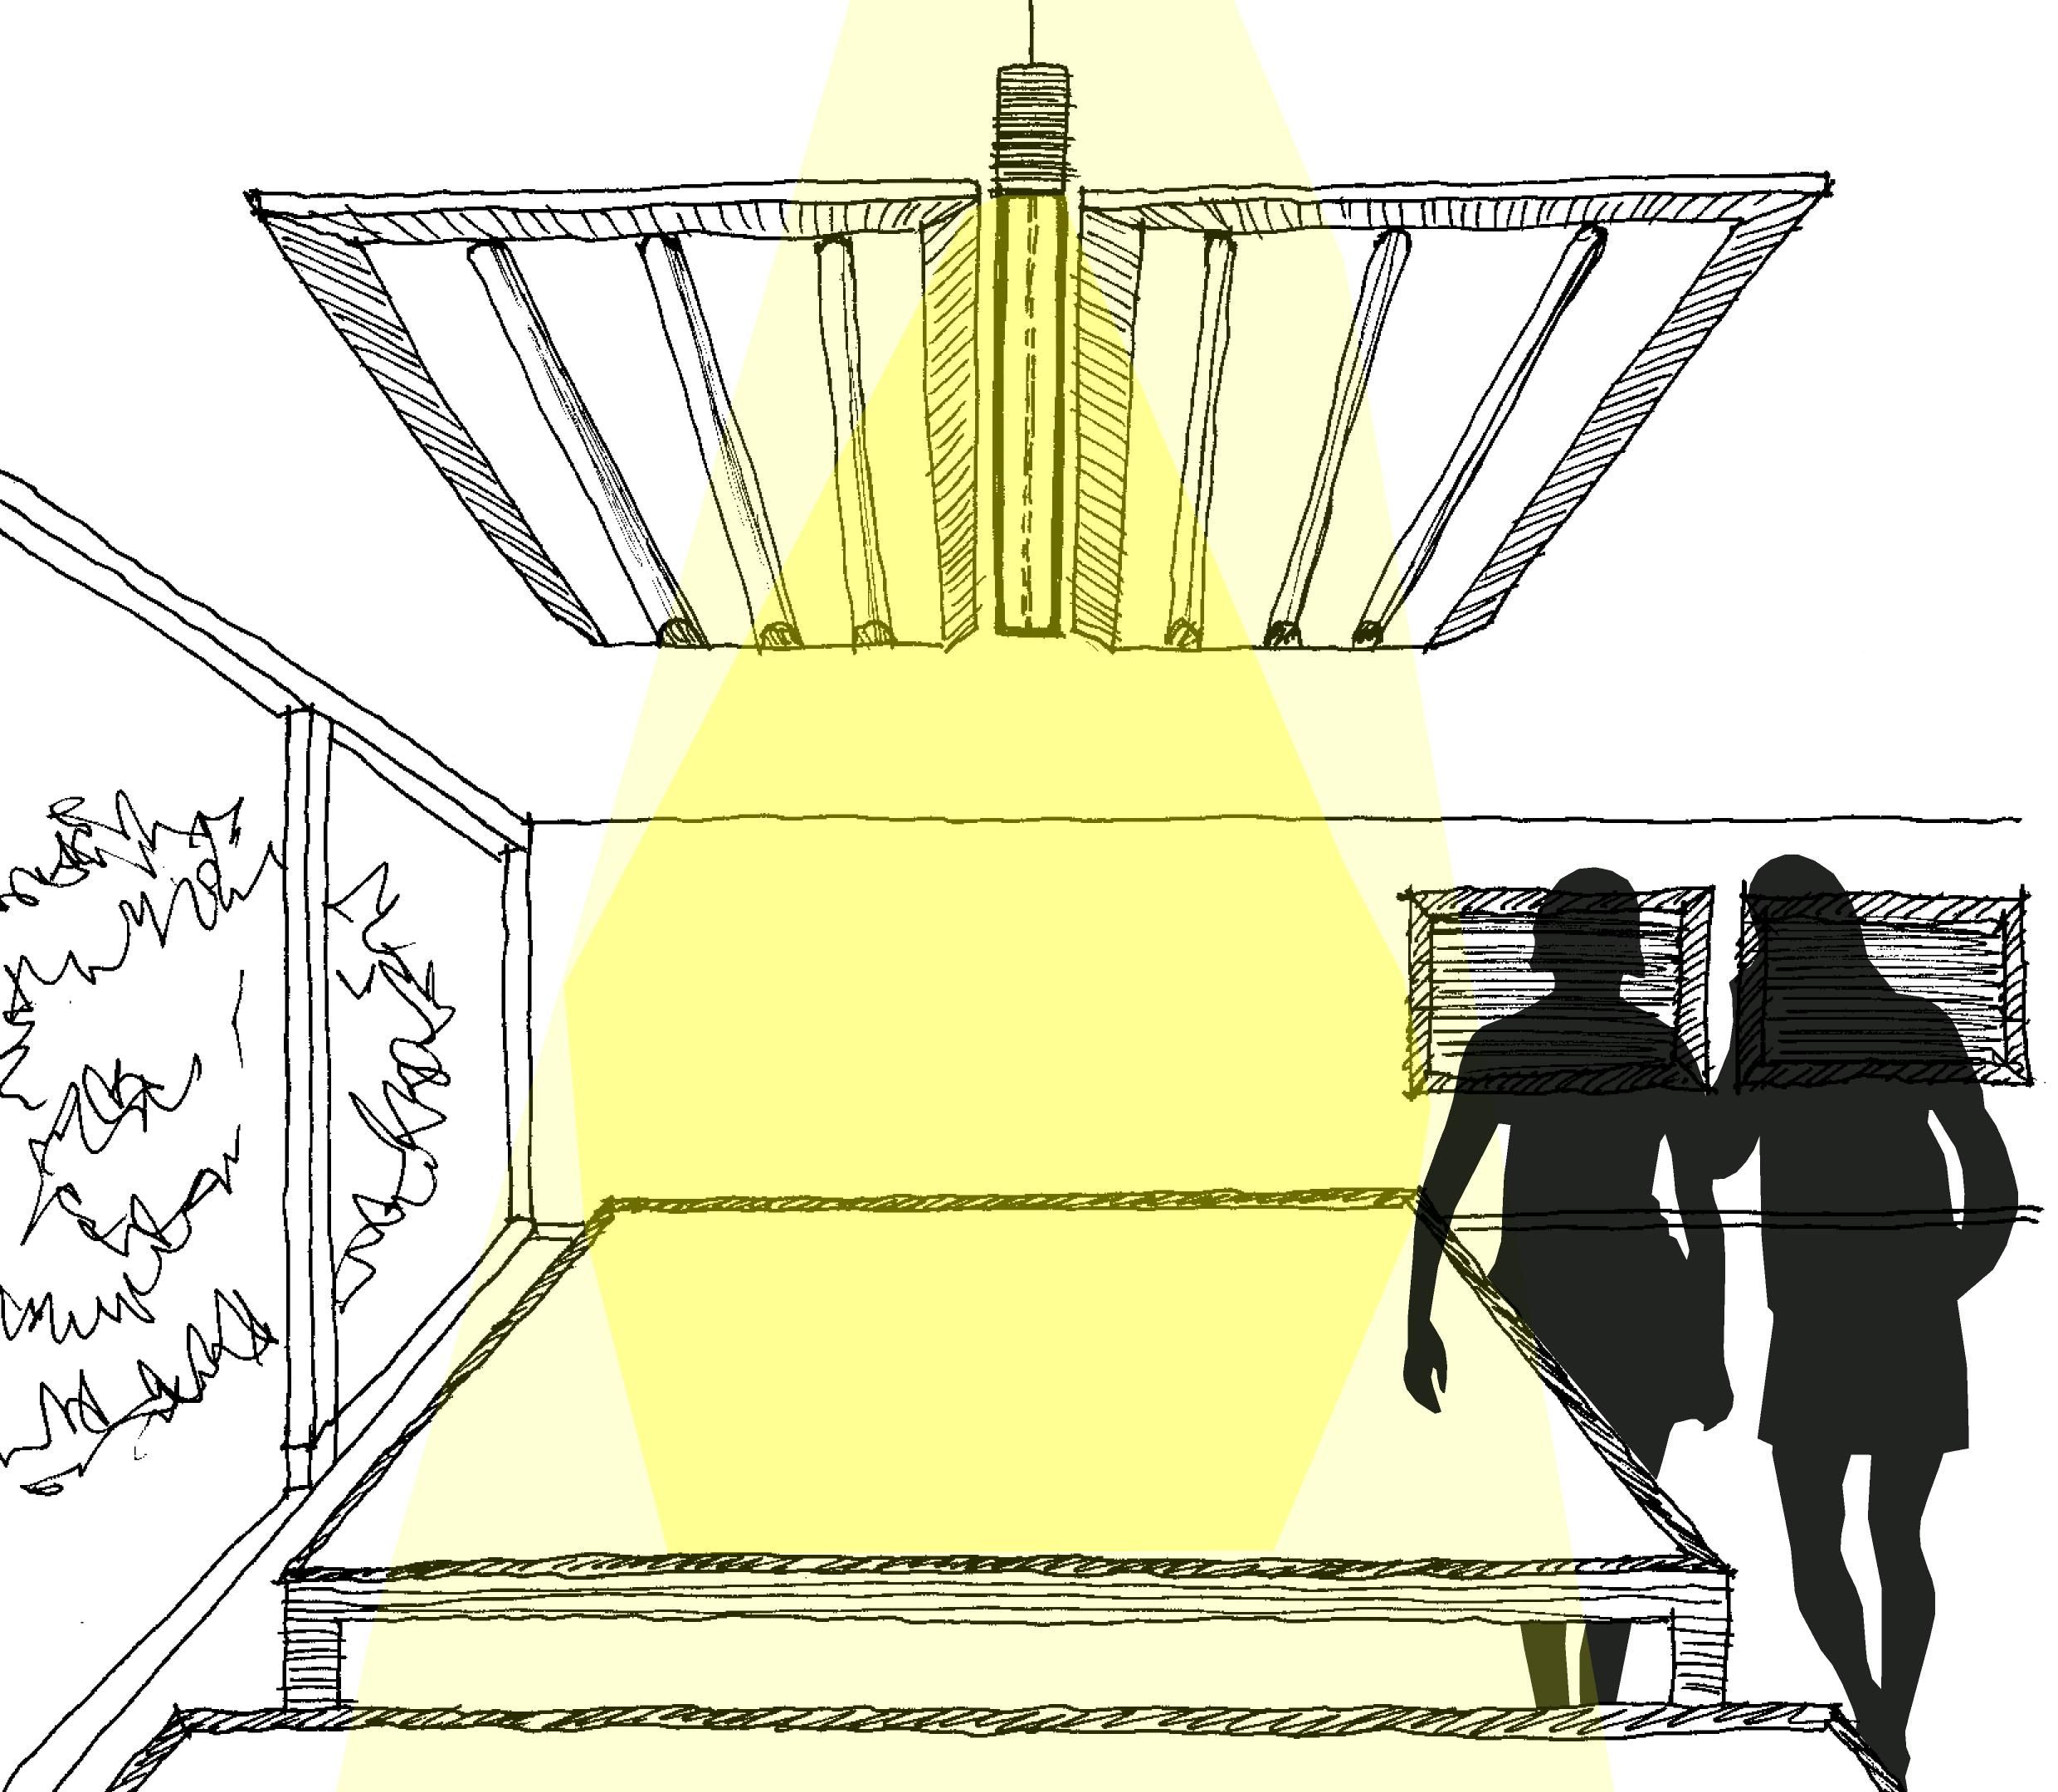 Diade lighting and sound absorption system - Sketch - Monica Armani for Luceplan